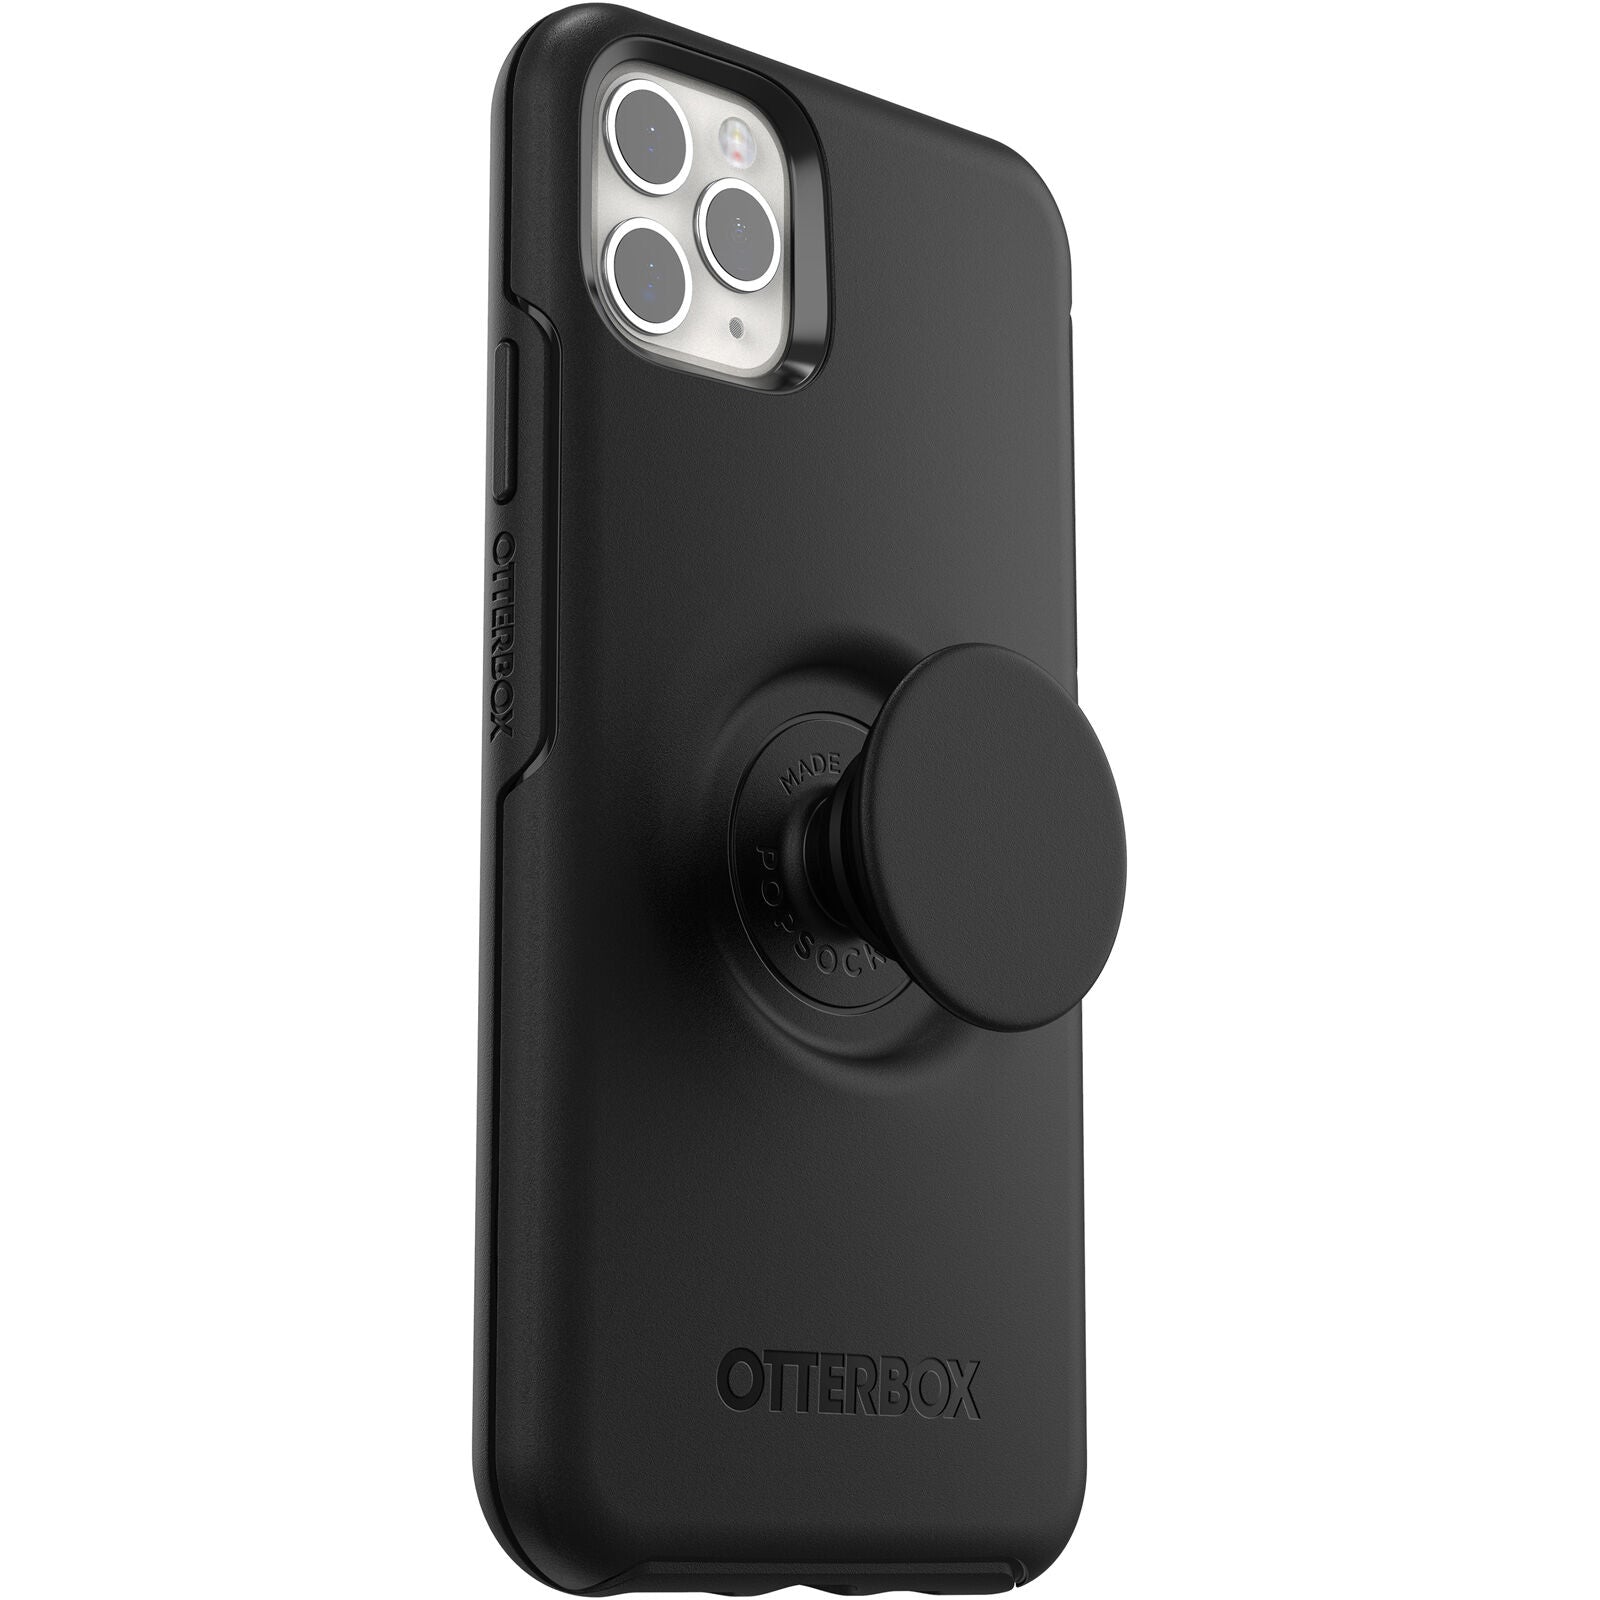 Otterbox Popsocket Case for iPhone 2019 X Large - Black